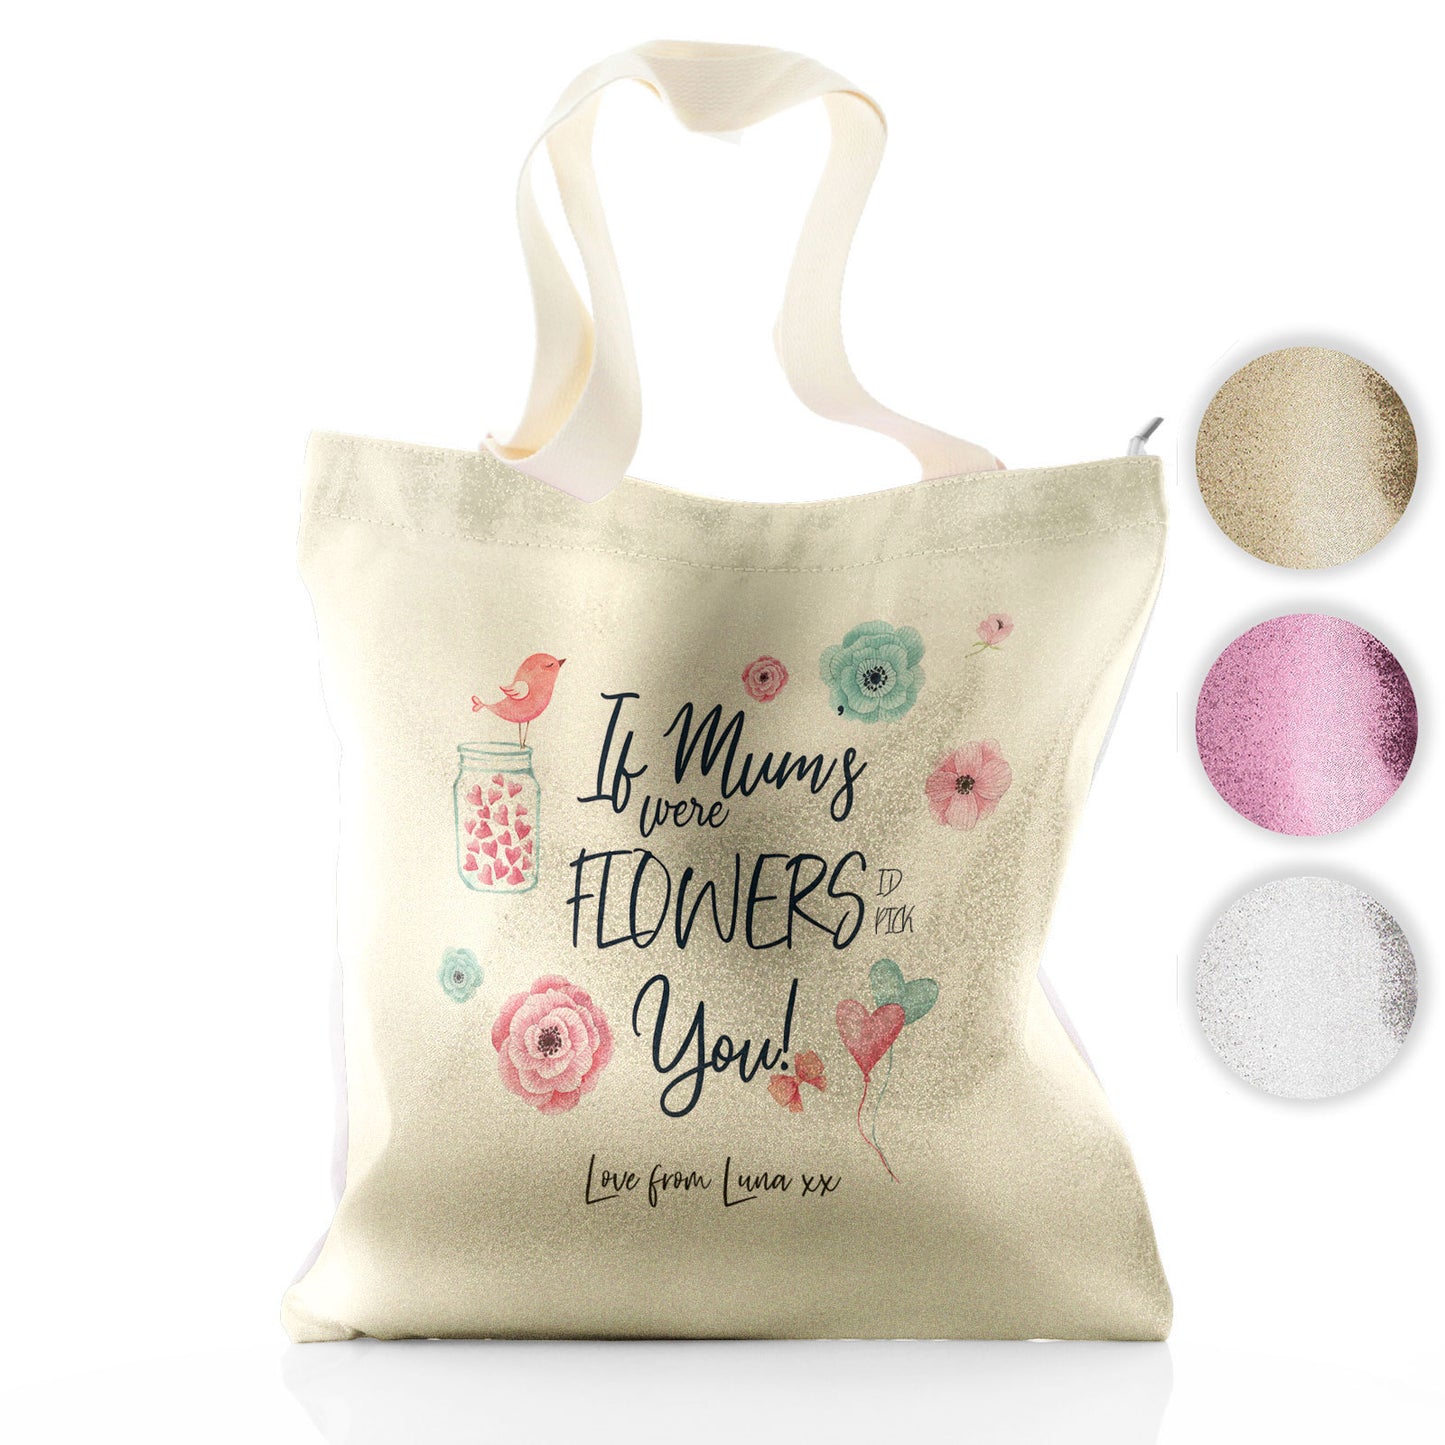 Personalised Glitter Tote Bag with Stylish Text and Flowers Love Message